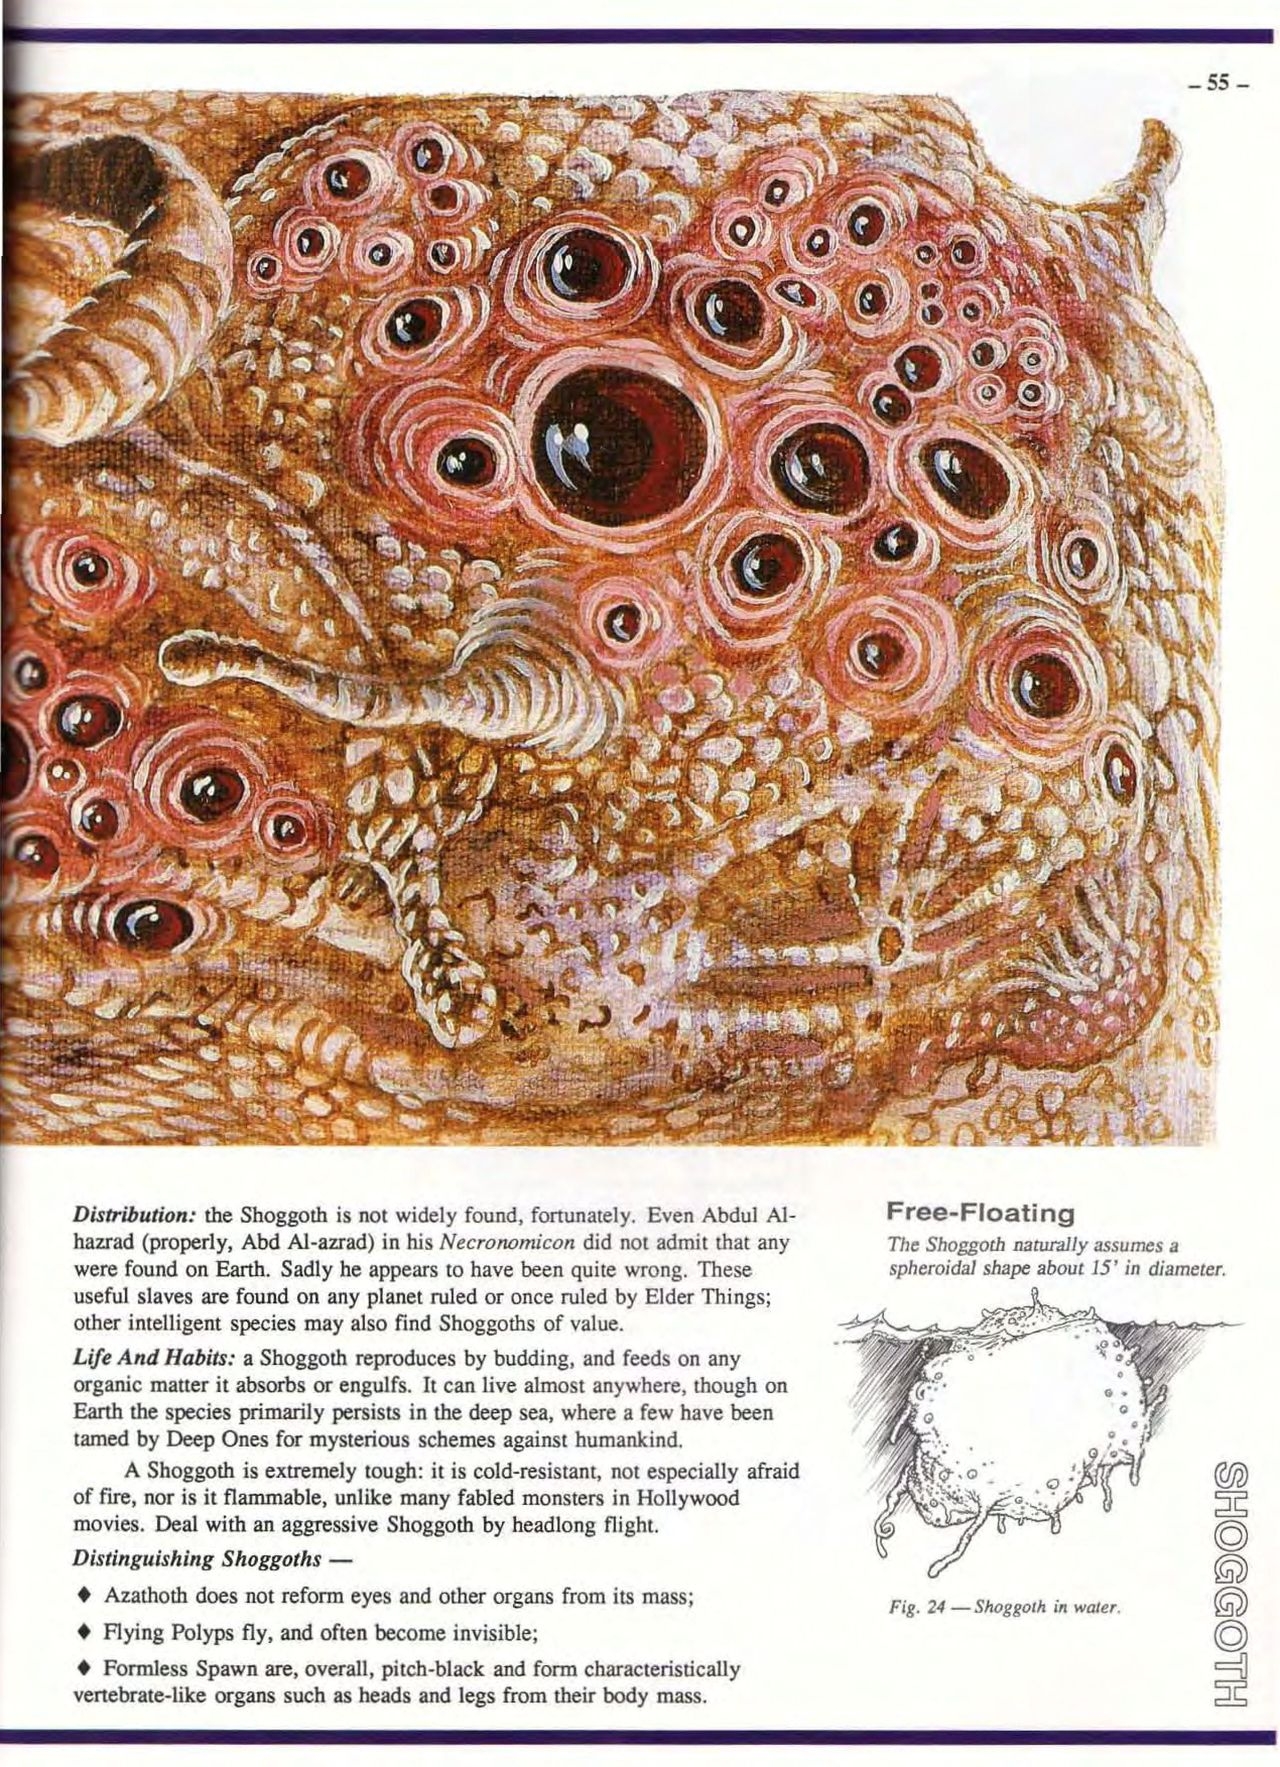 S. Petersen's Field Guide to Cthulhu Monsters 54